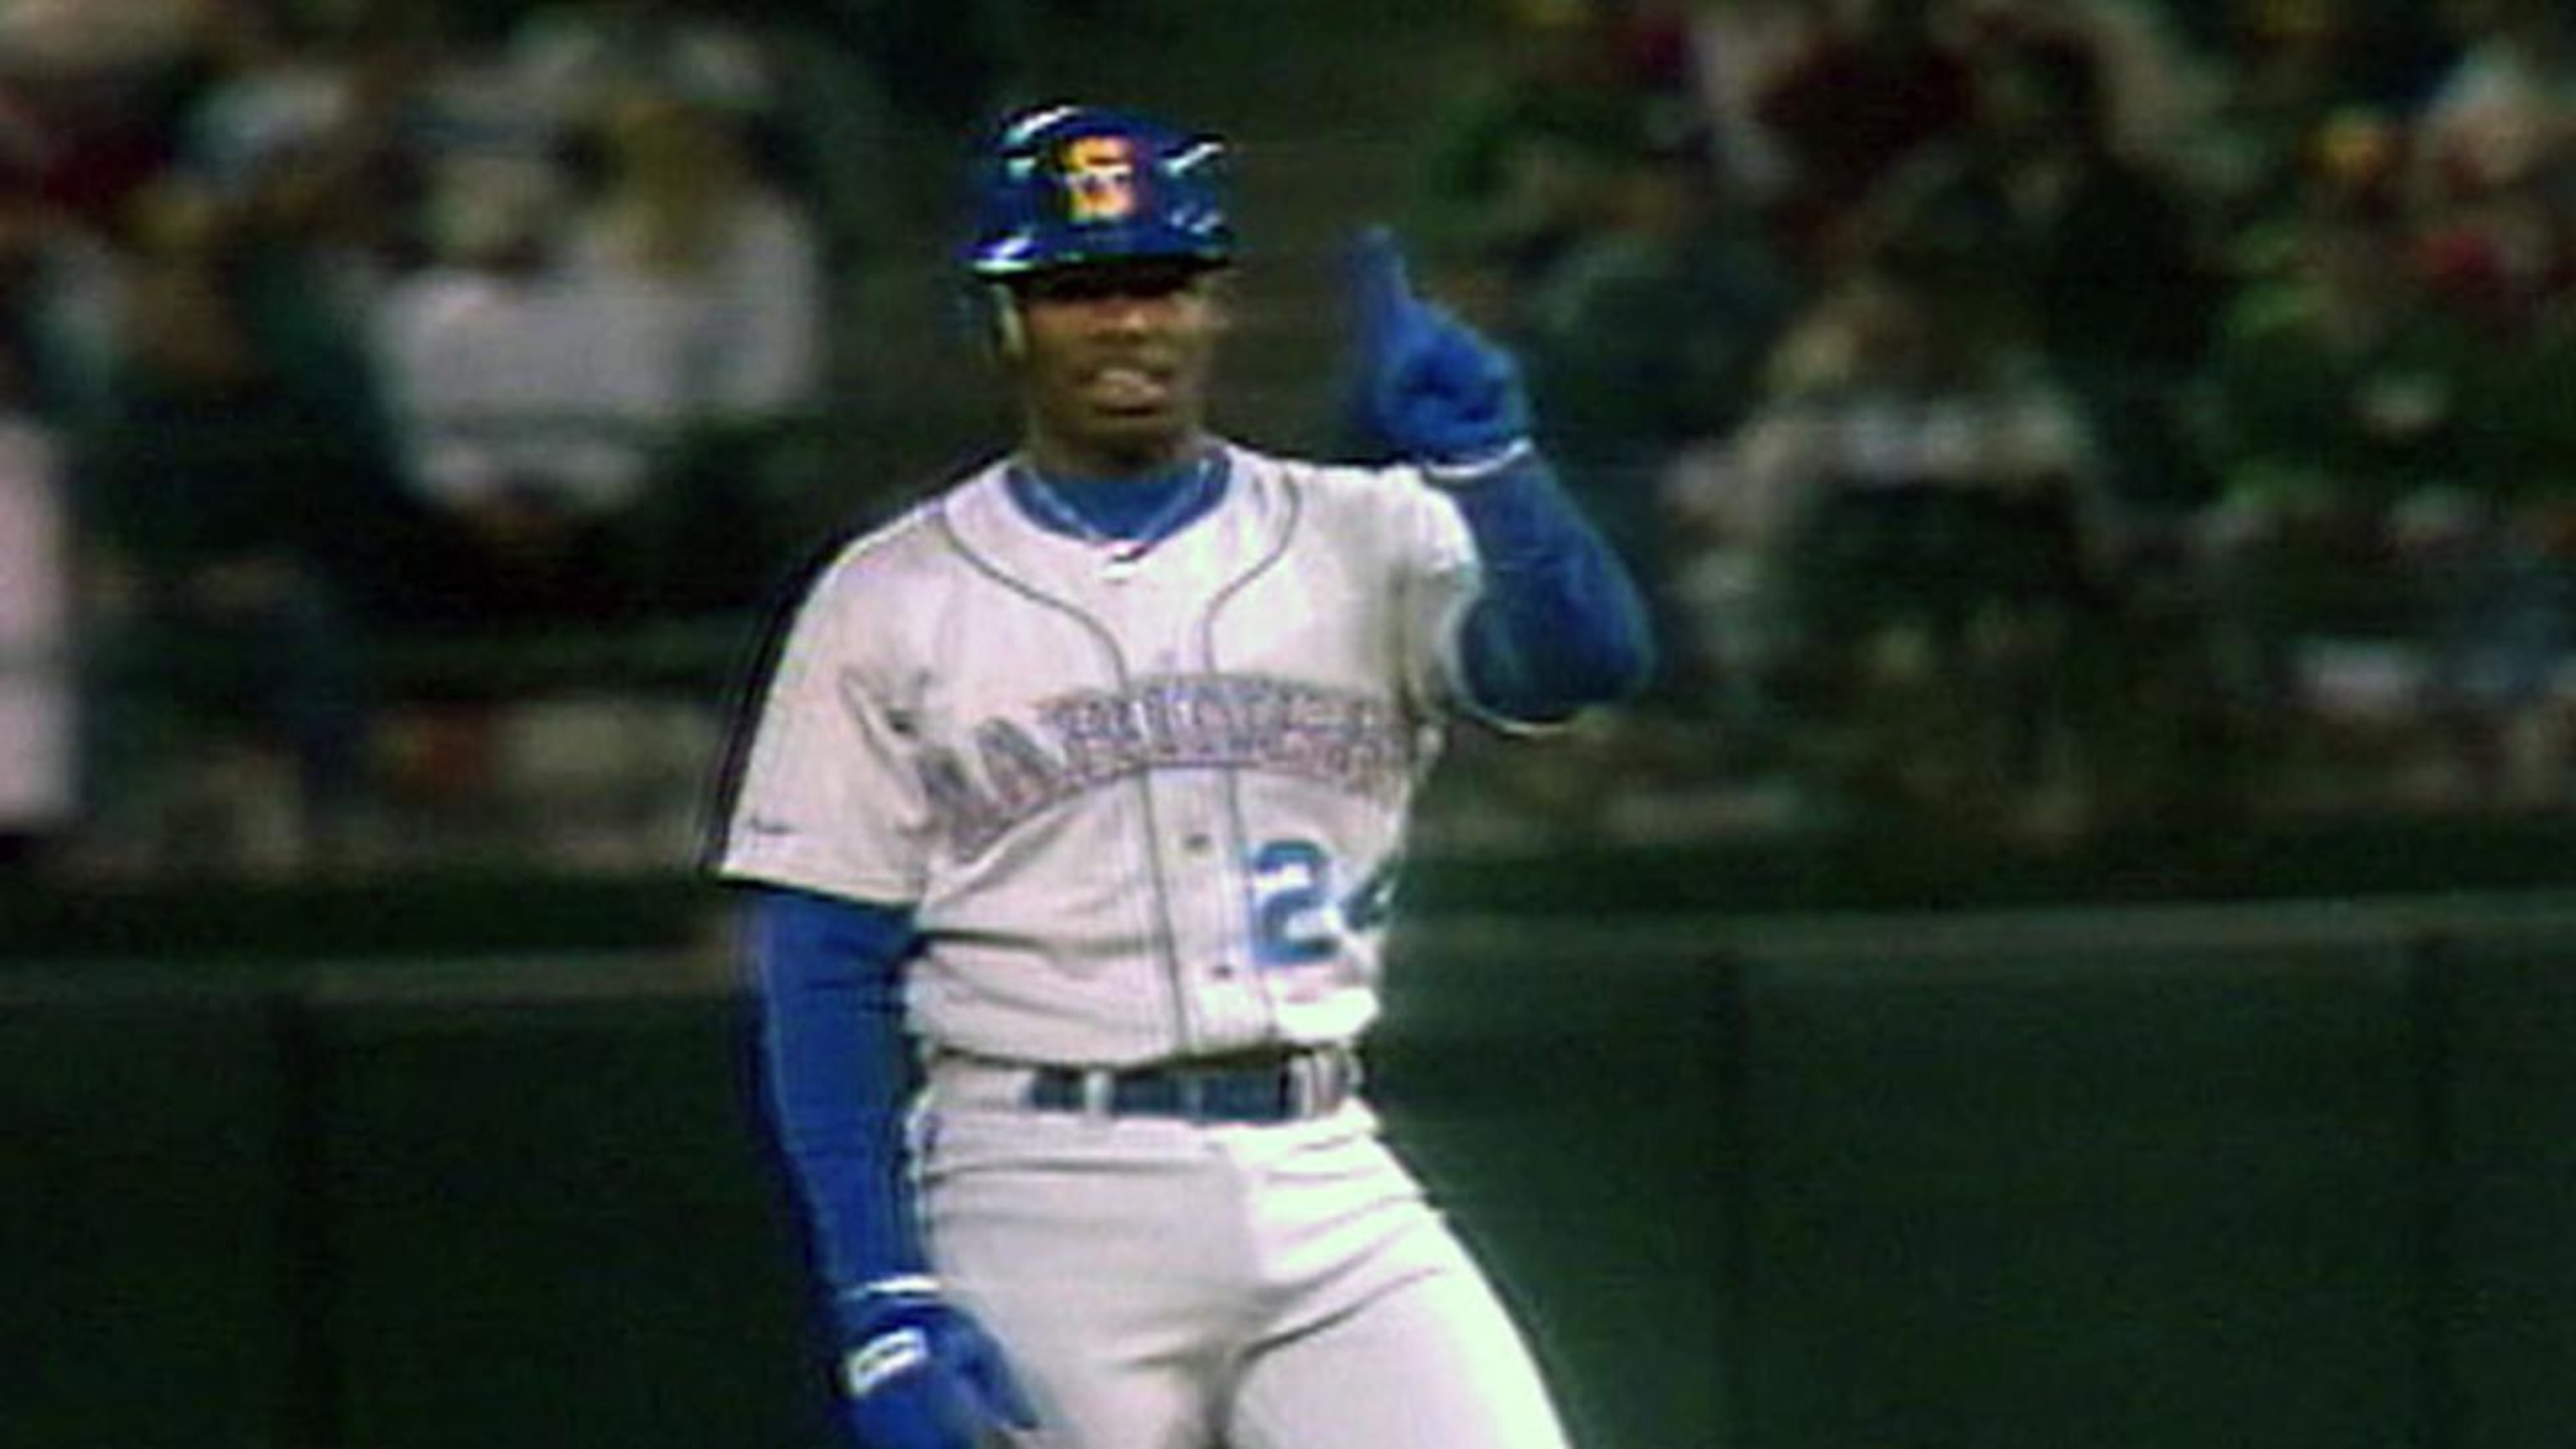 Griffey's first big league hit